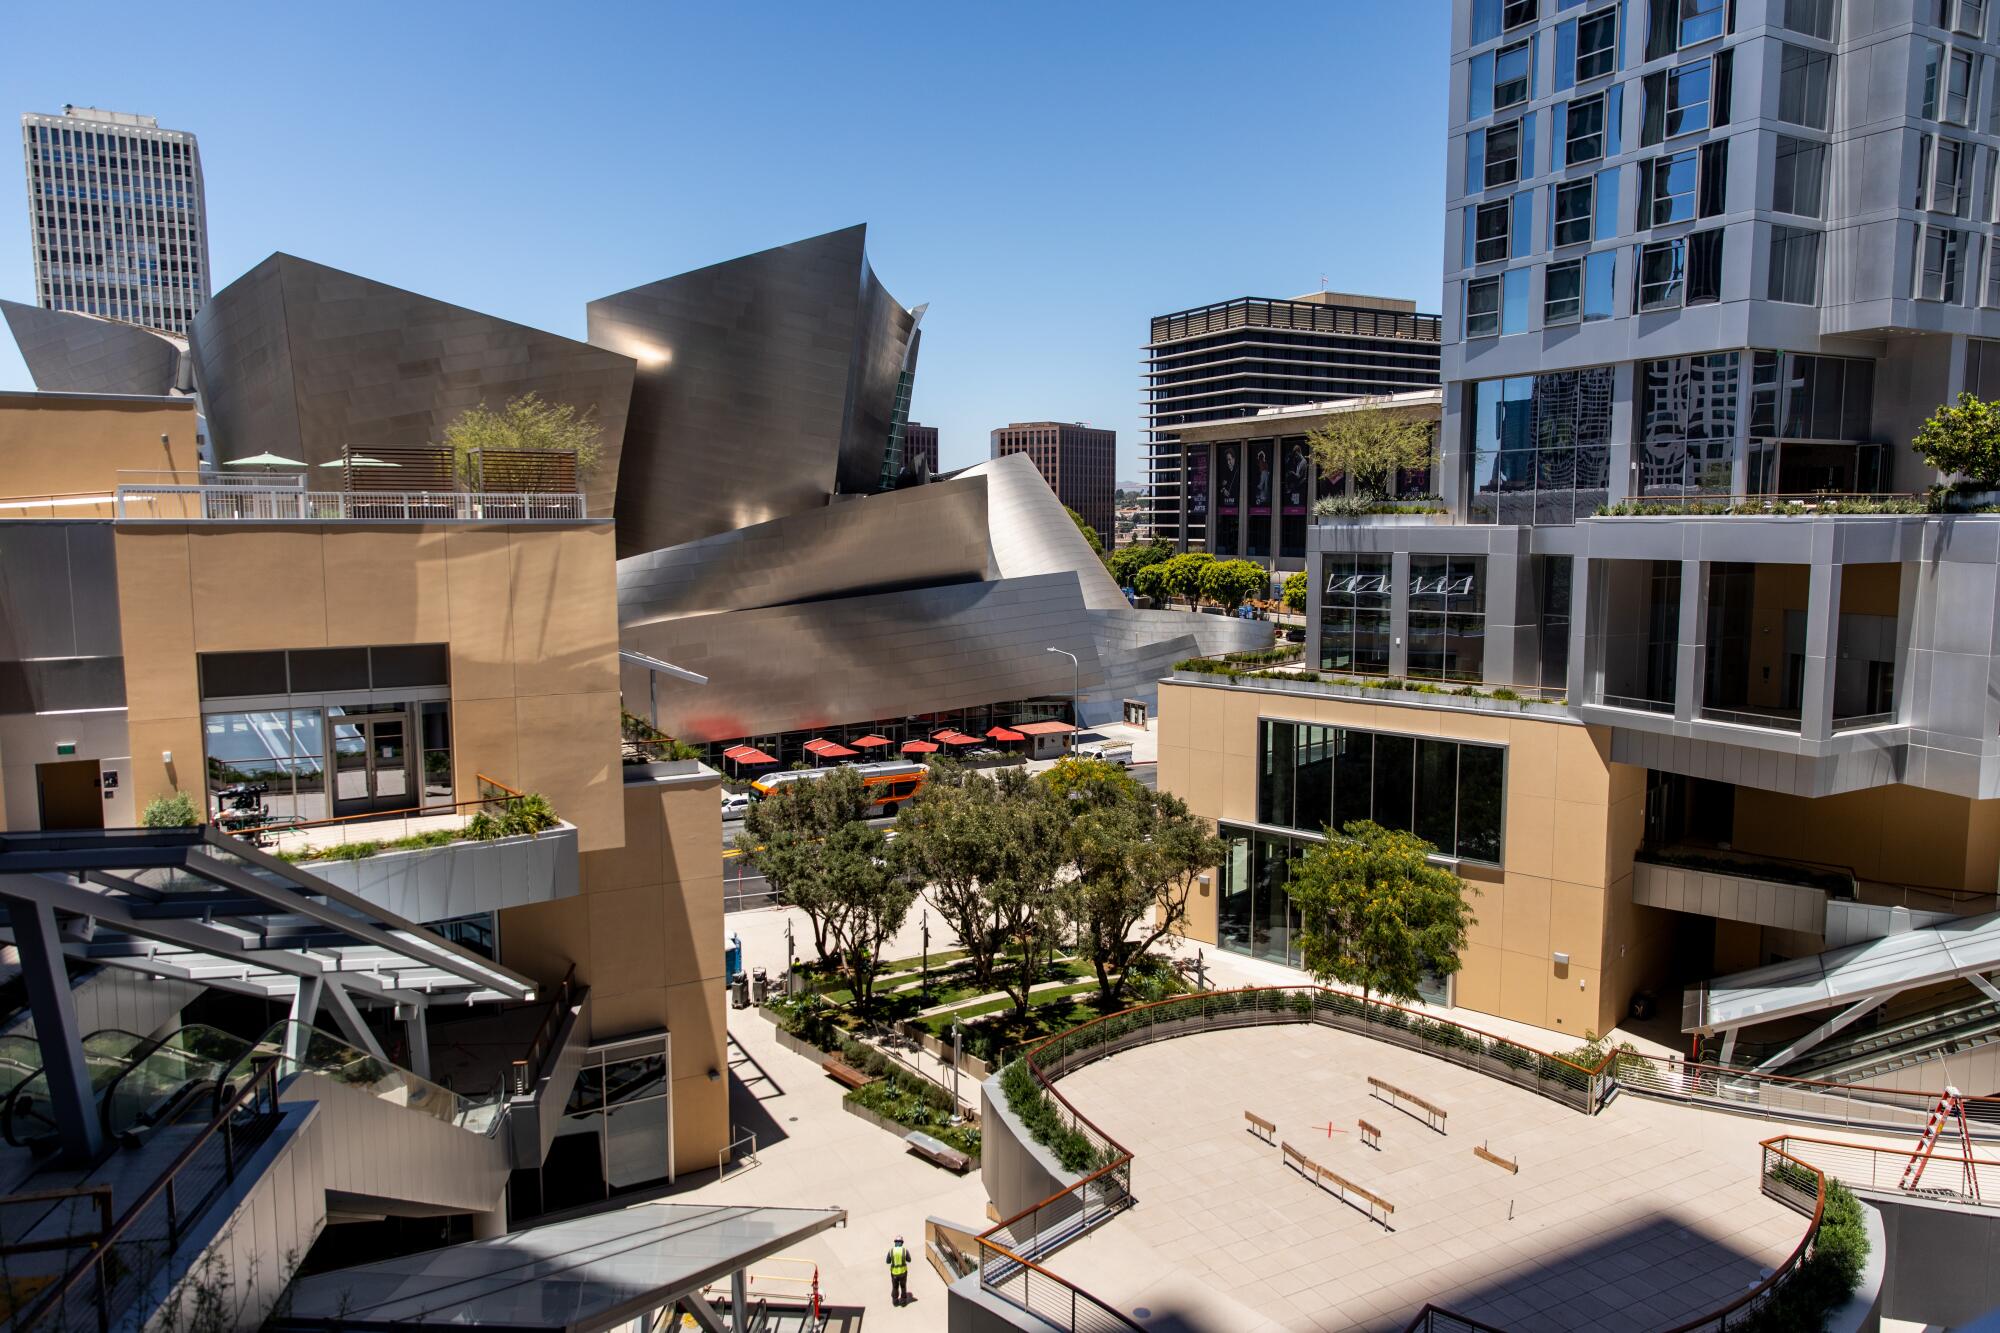 View of the Grand LA, designed by Frank Gehry